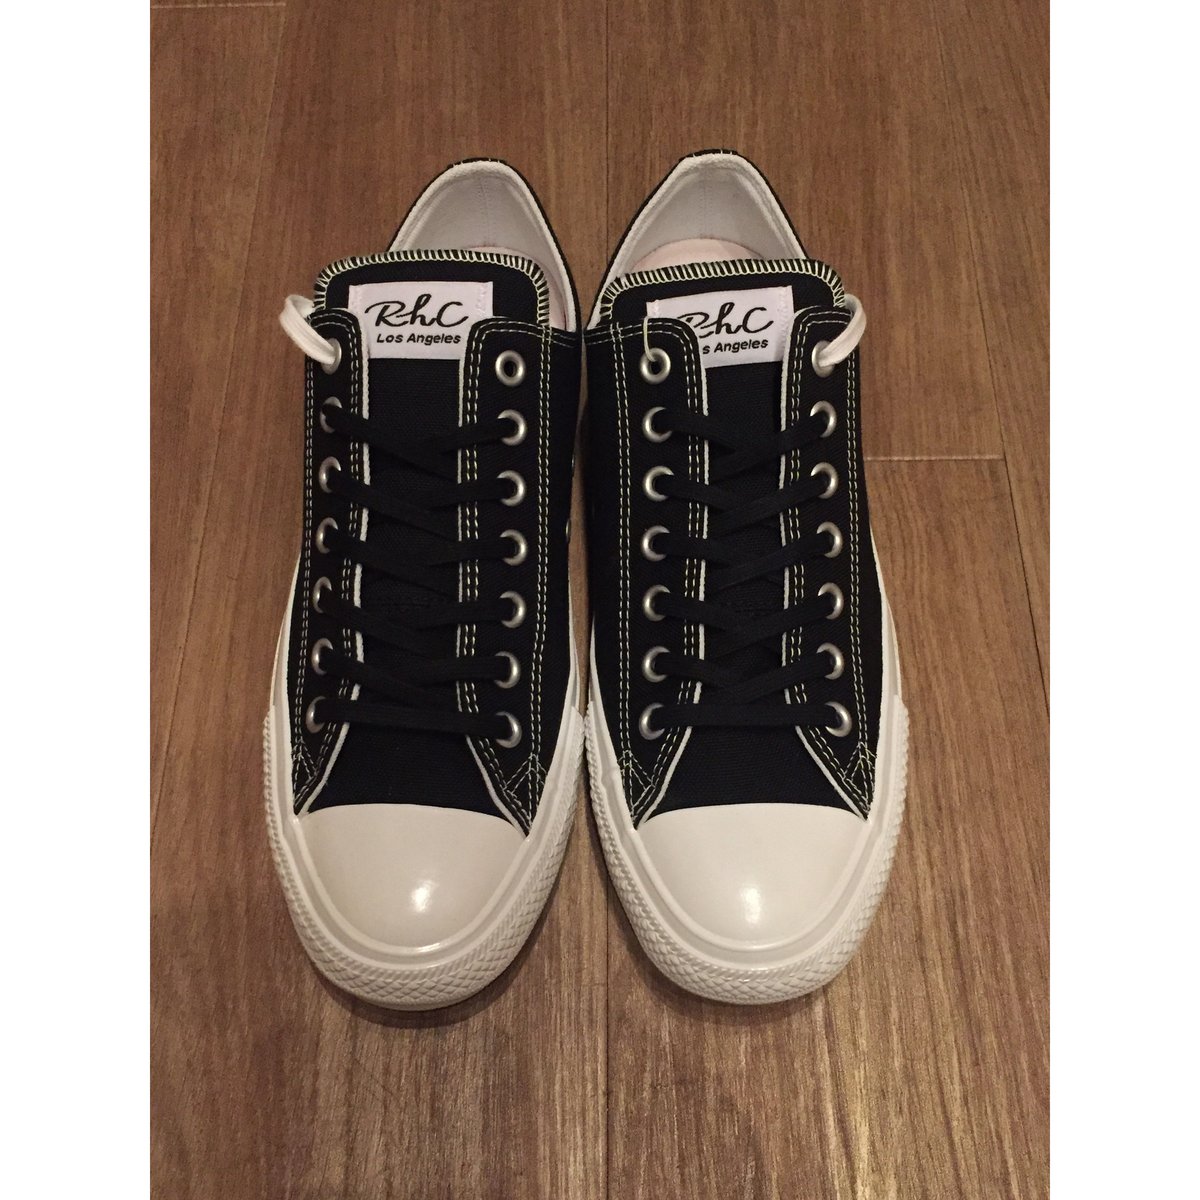 ☆Ron Hermanコラボ -【USED】CONVERSE ALL STAR 100 OX